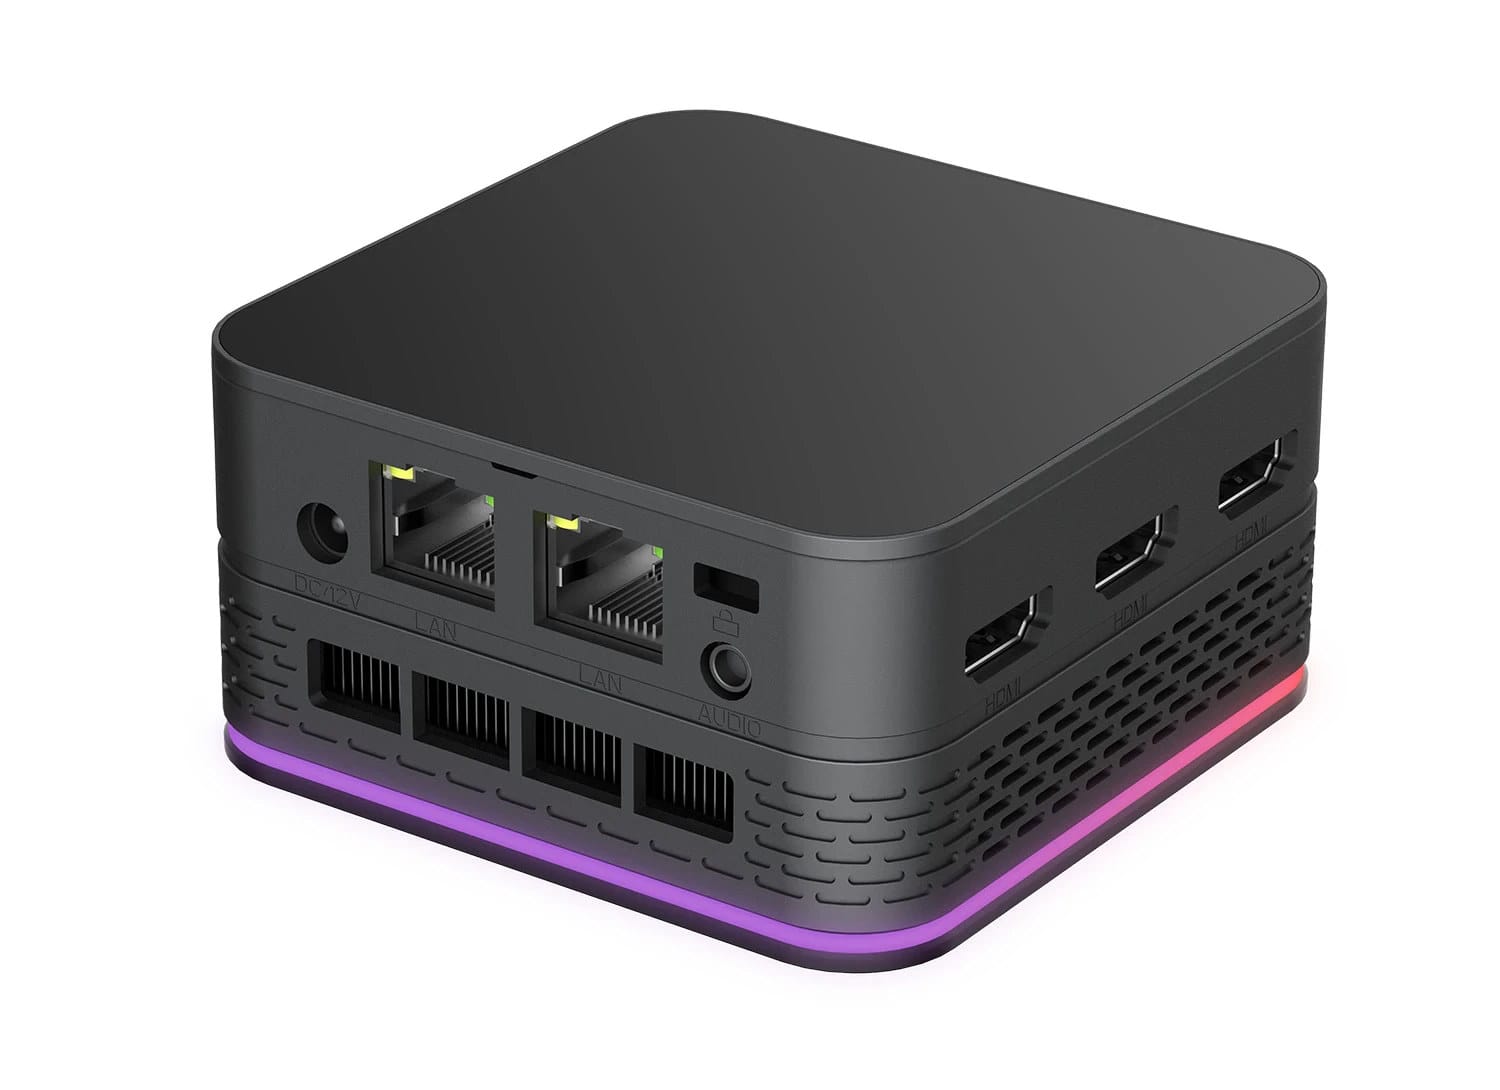 T9 Plus is a low-cost pocket-sized Intel N100 mini PC with three